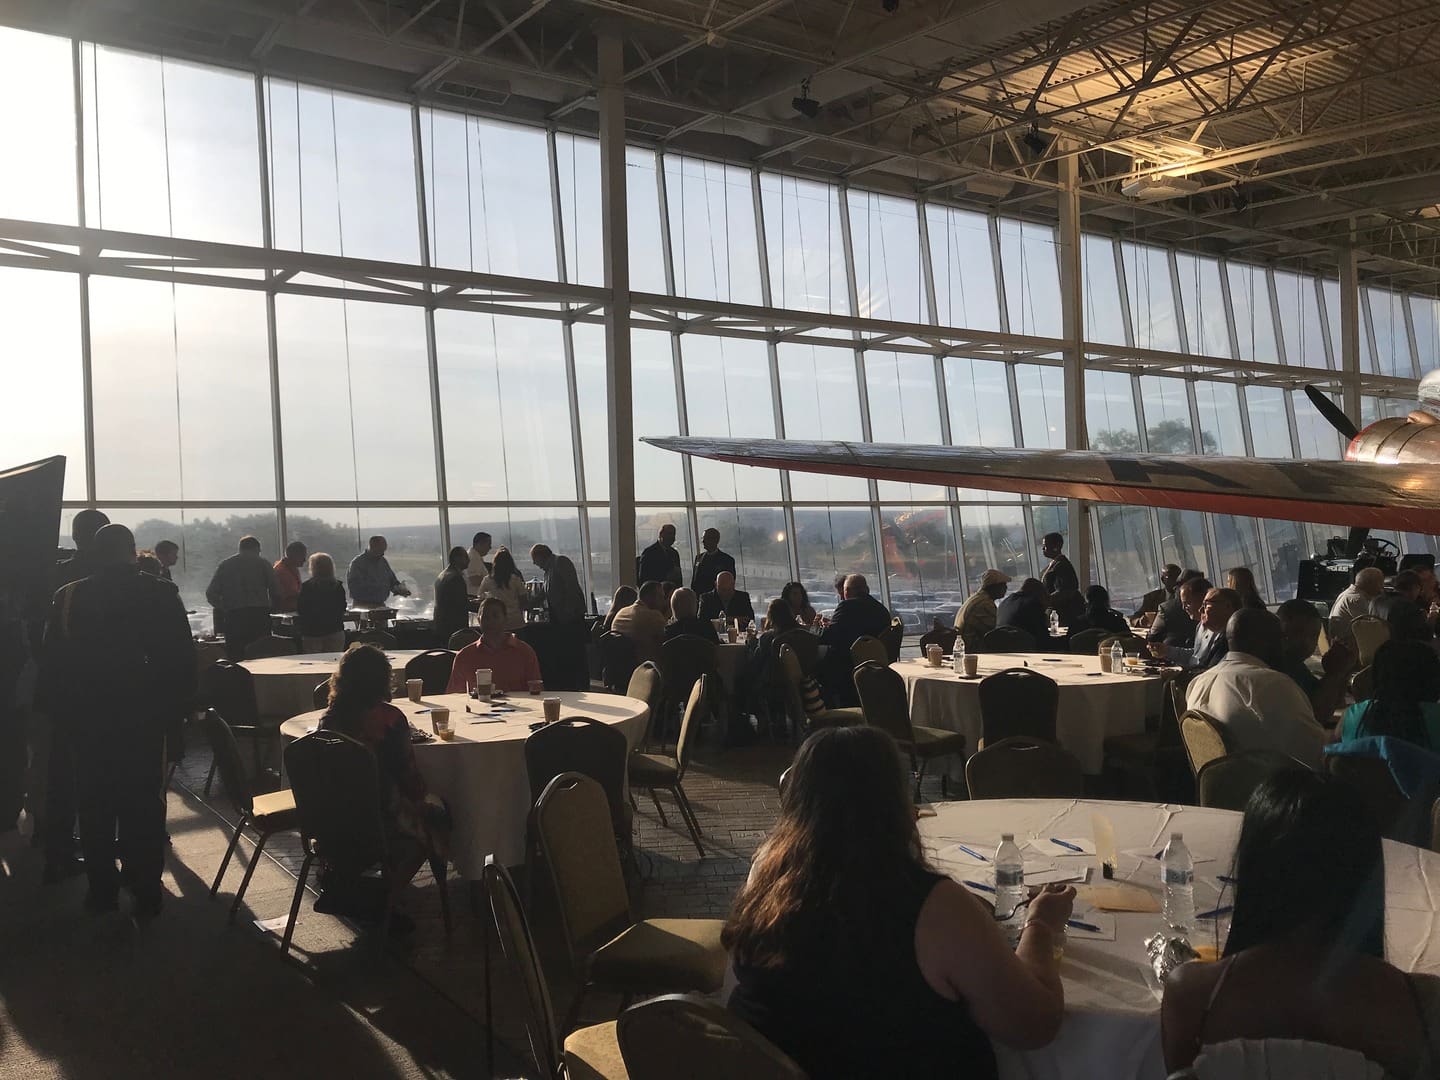 sunlit view of plane and blue sky on windows with people eating